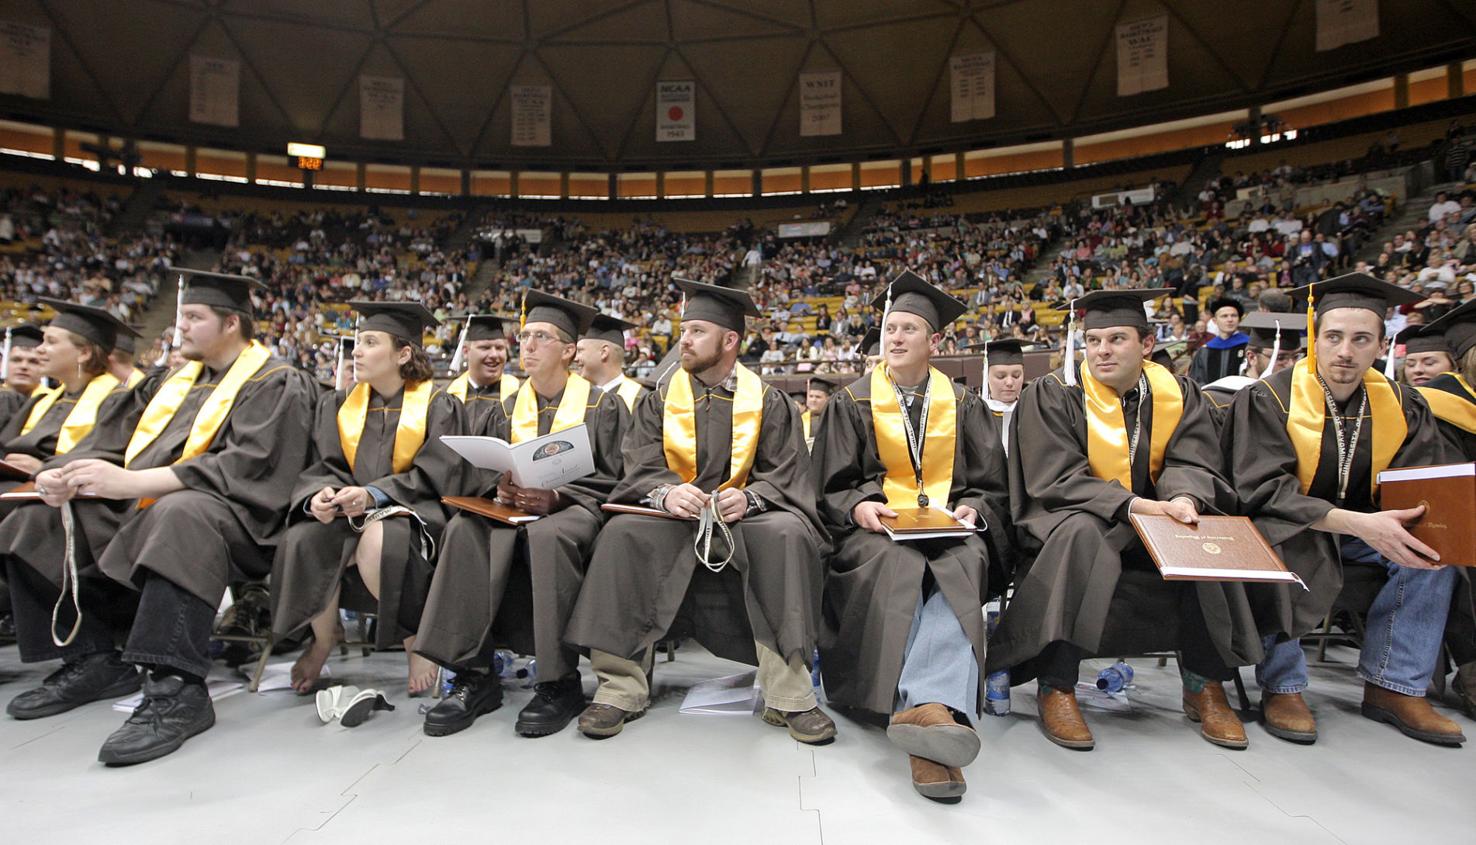 University of Wyoming to hold inperson graduation ceremony in May